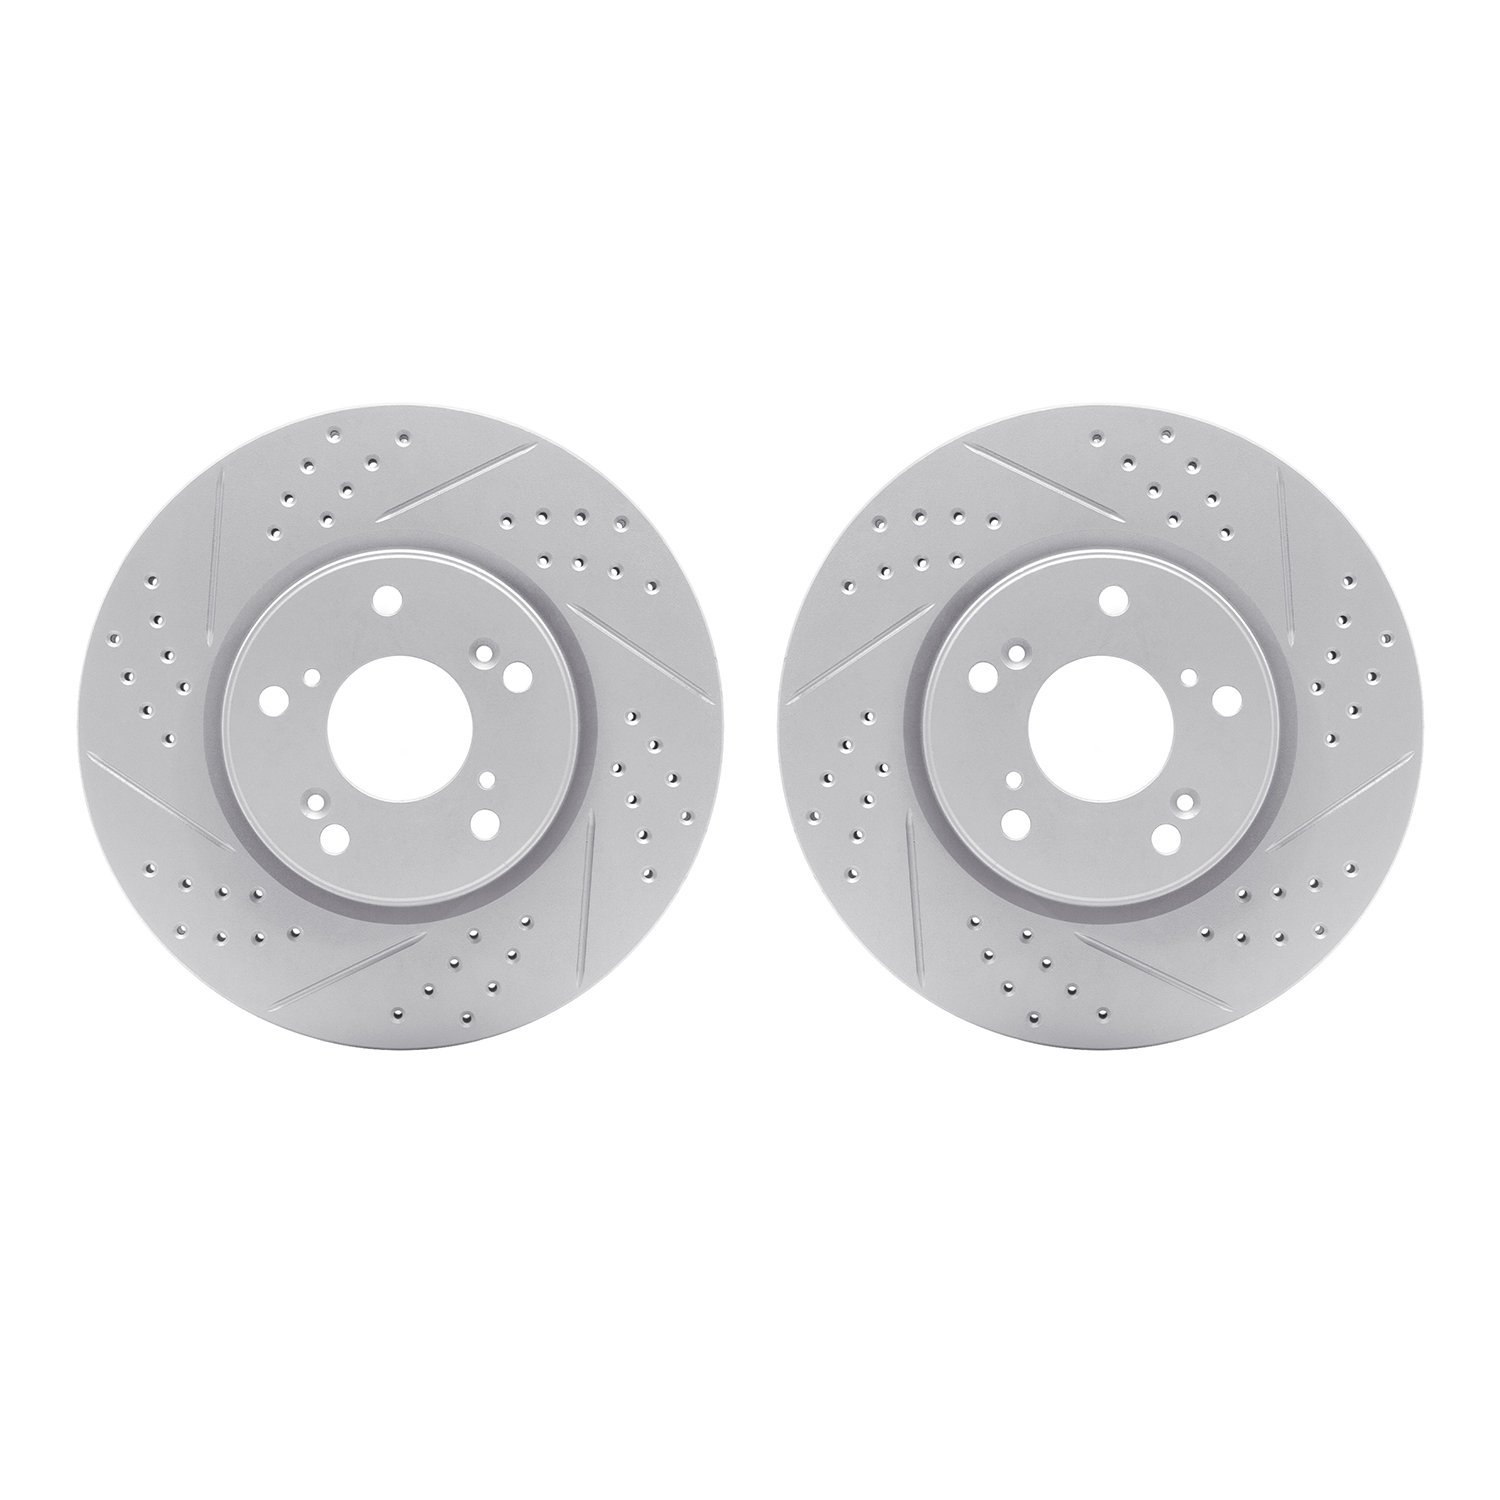 2002-59016 Geoperformance Drilled/Slotted Brake Rotors, Fits Select Acura/Honda, Position: Front